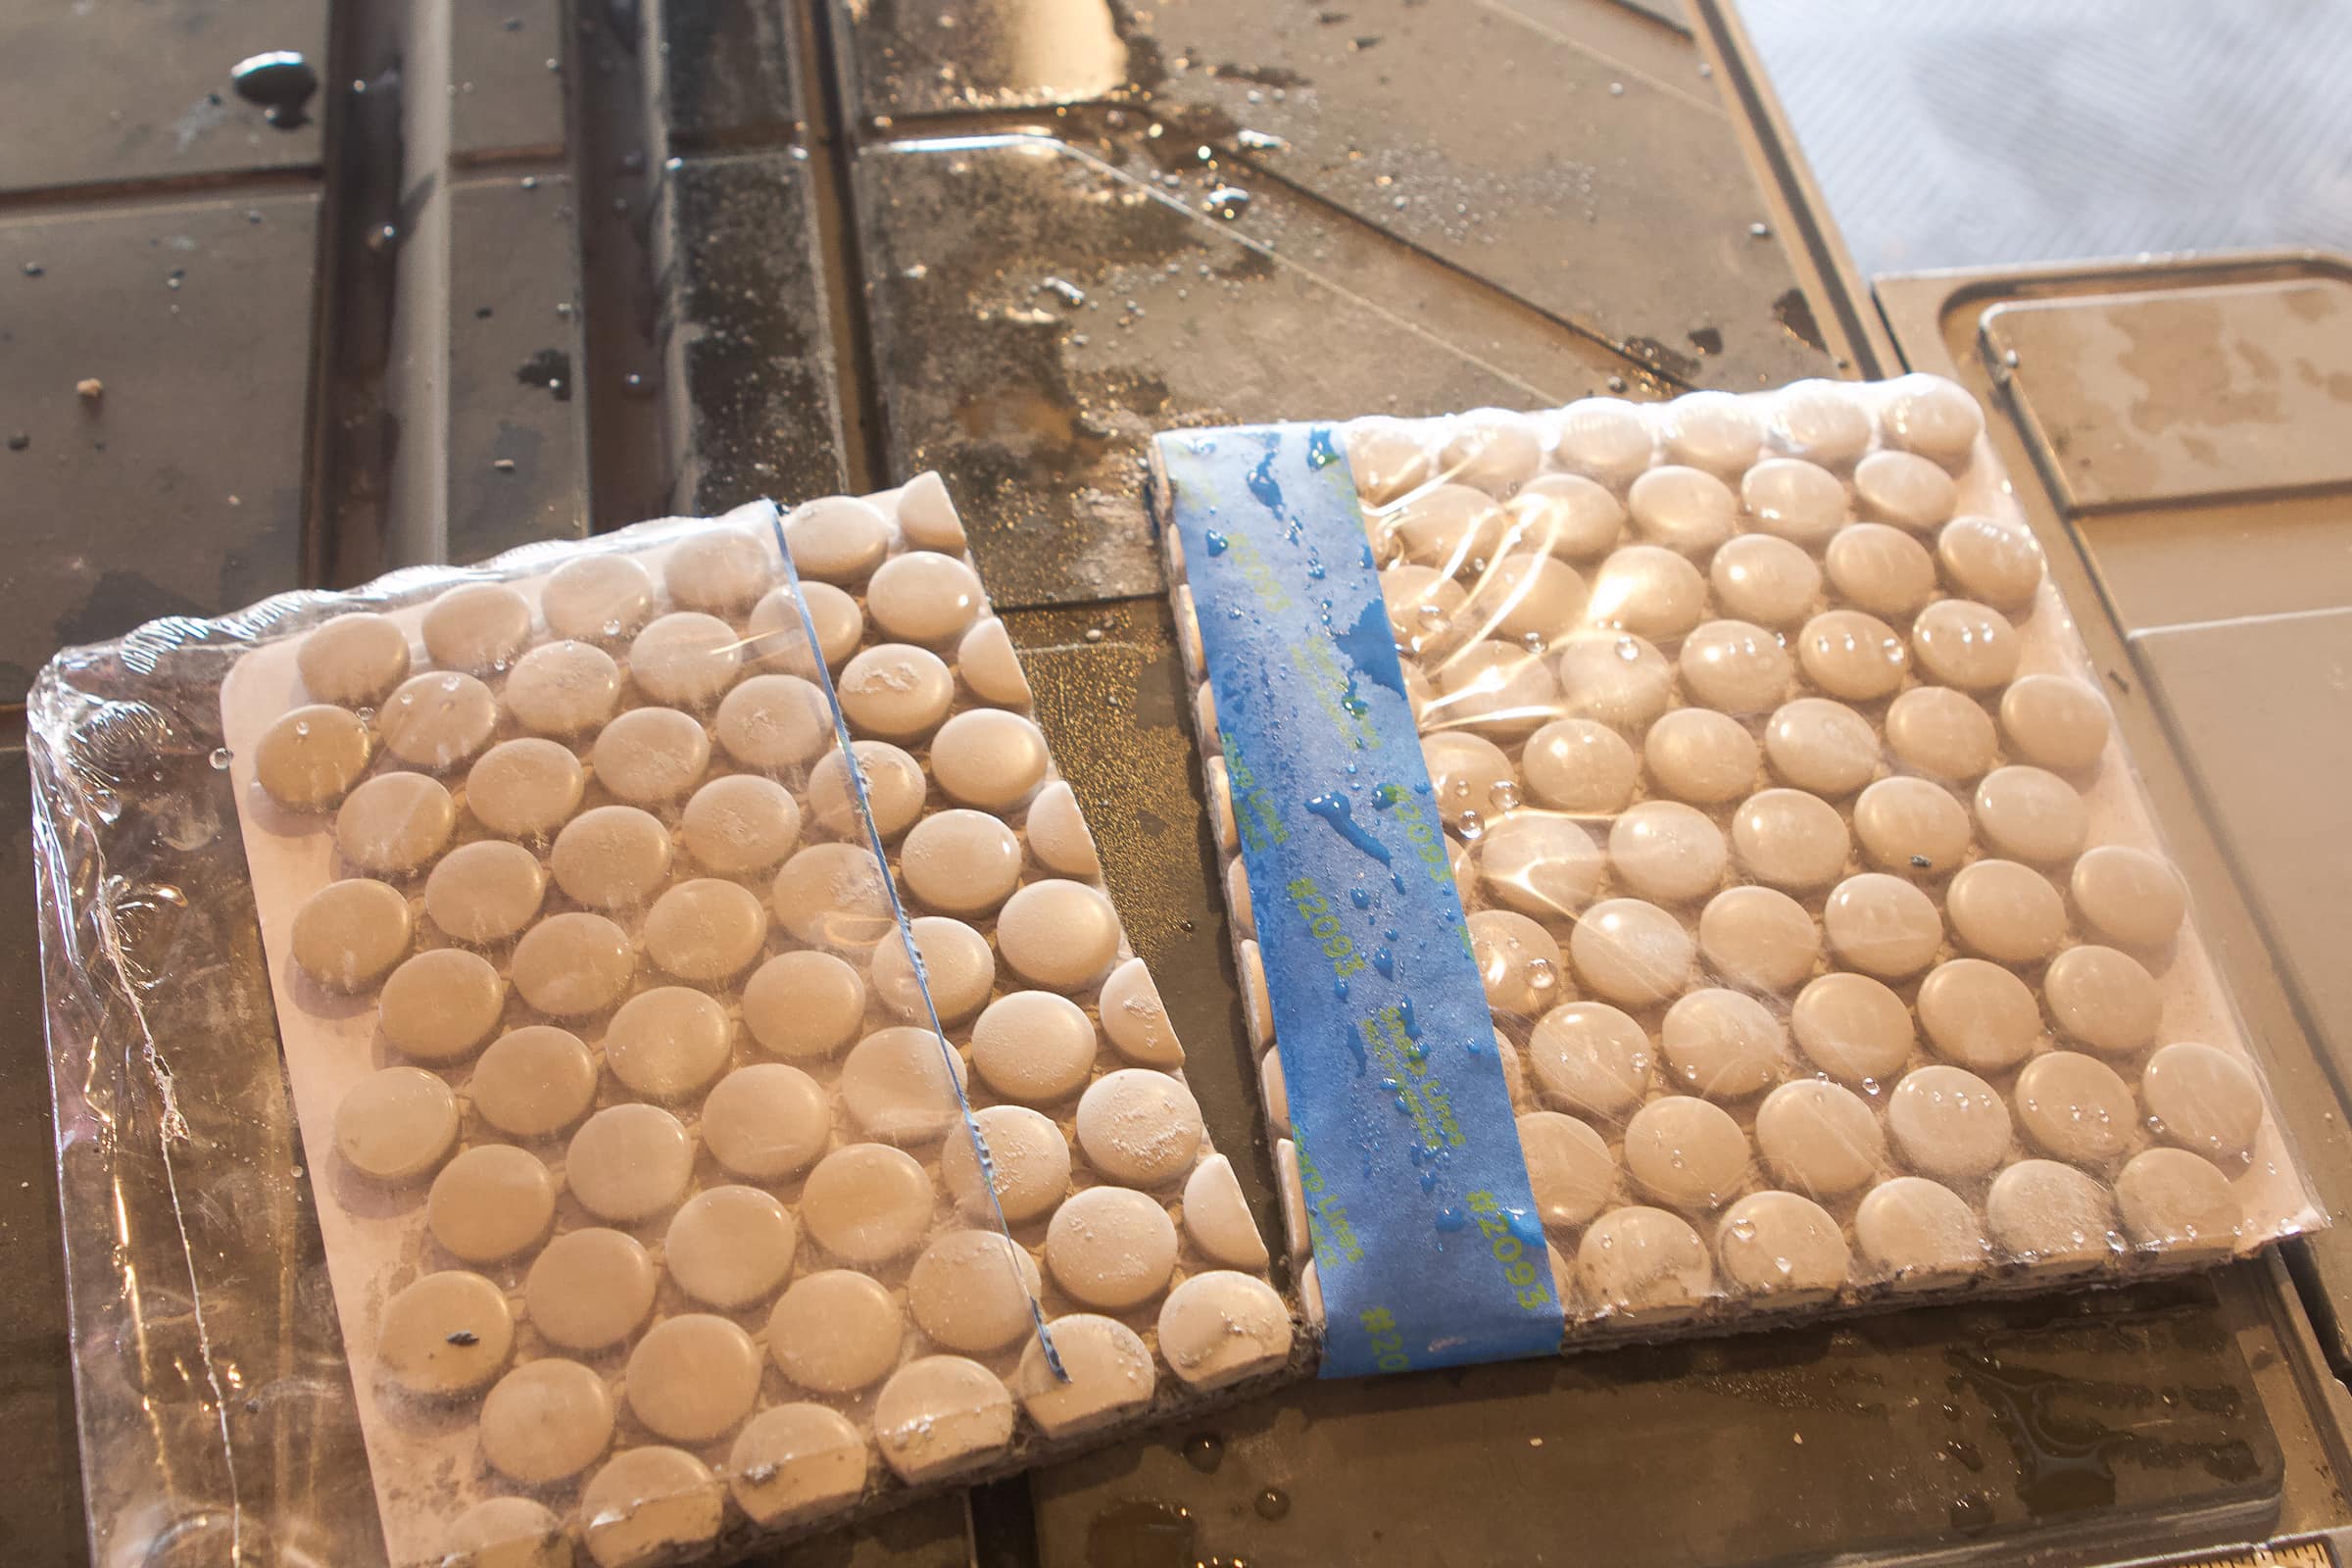 Keep your penny tile in the packaging when cutting it on the wet saw